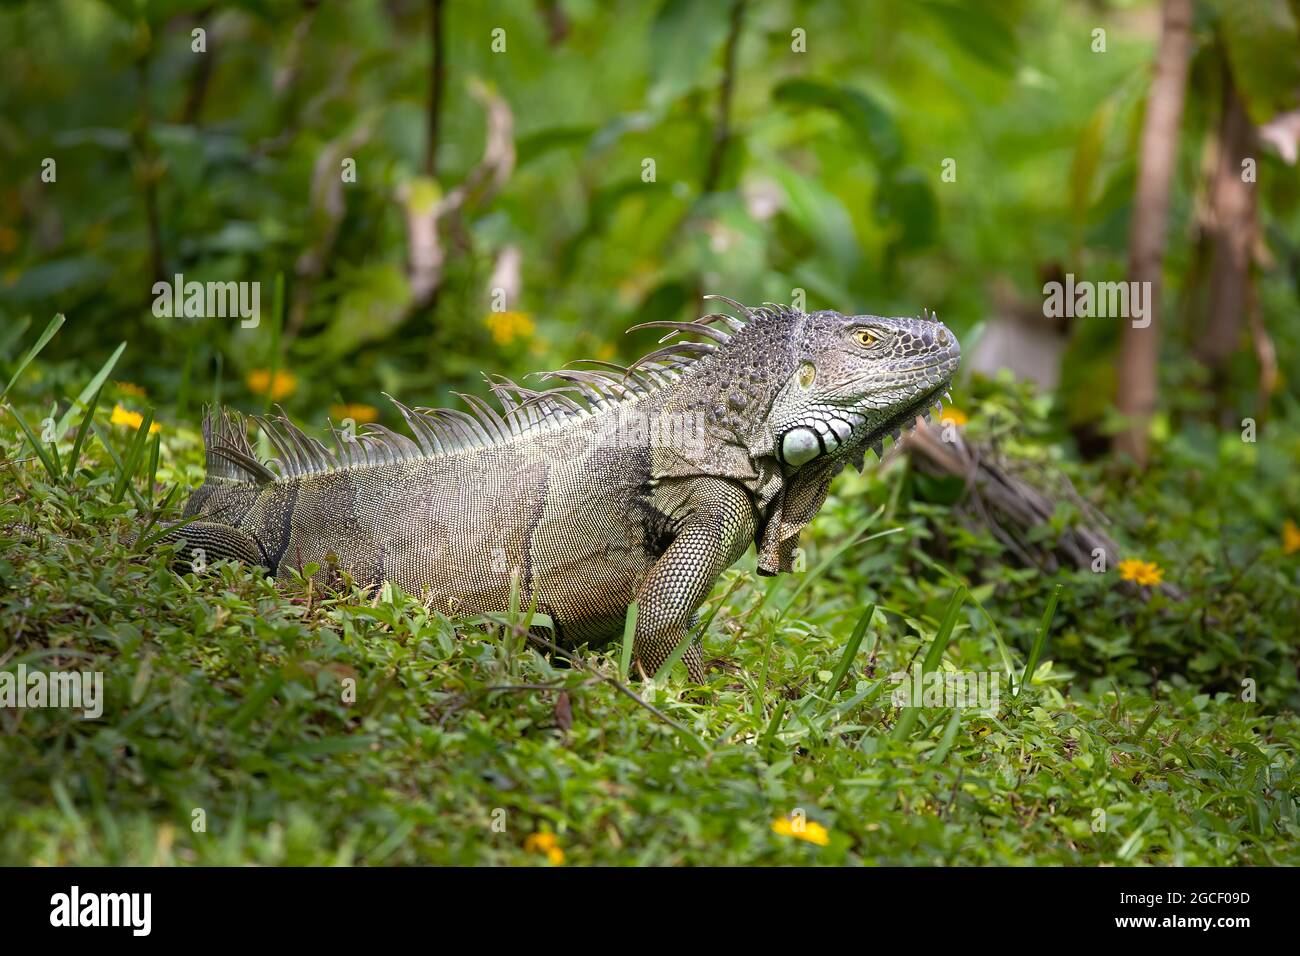 A large male iguana keeps a wary eye on the camera in a small nature park in Fort Lauderdale, FL. Stock Photo